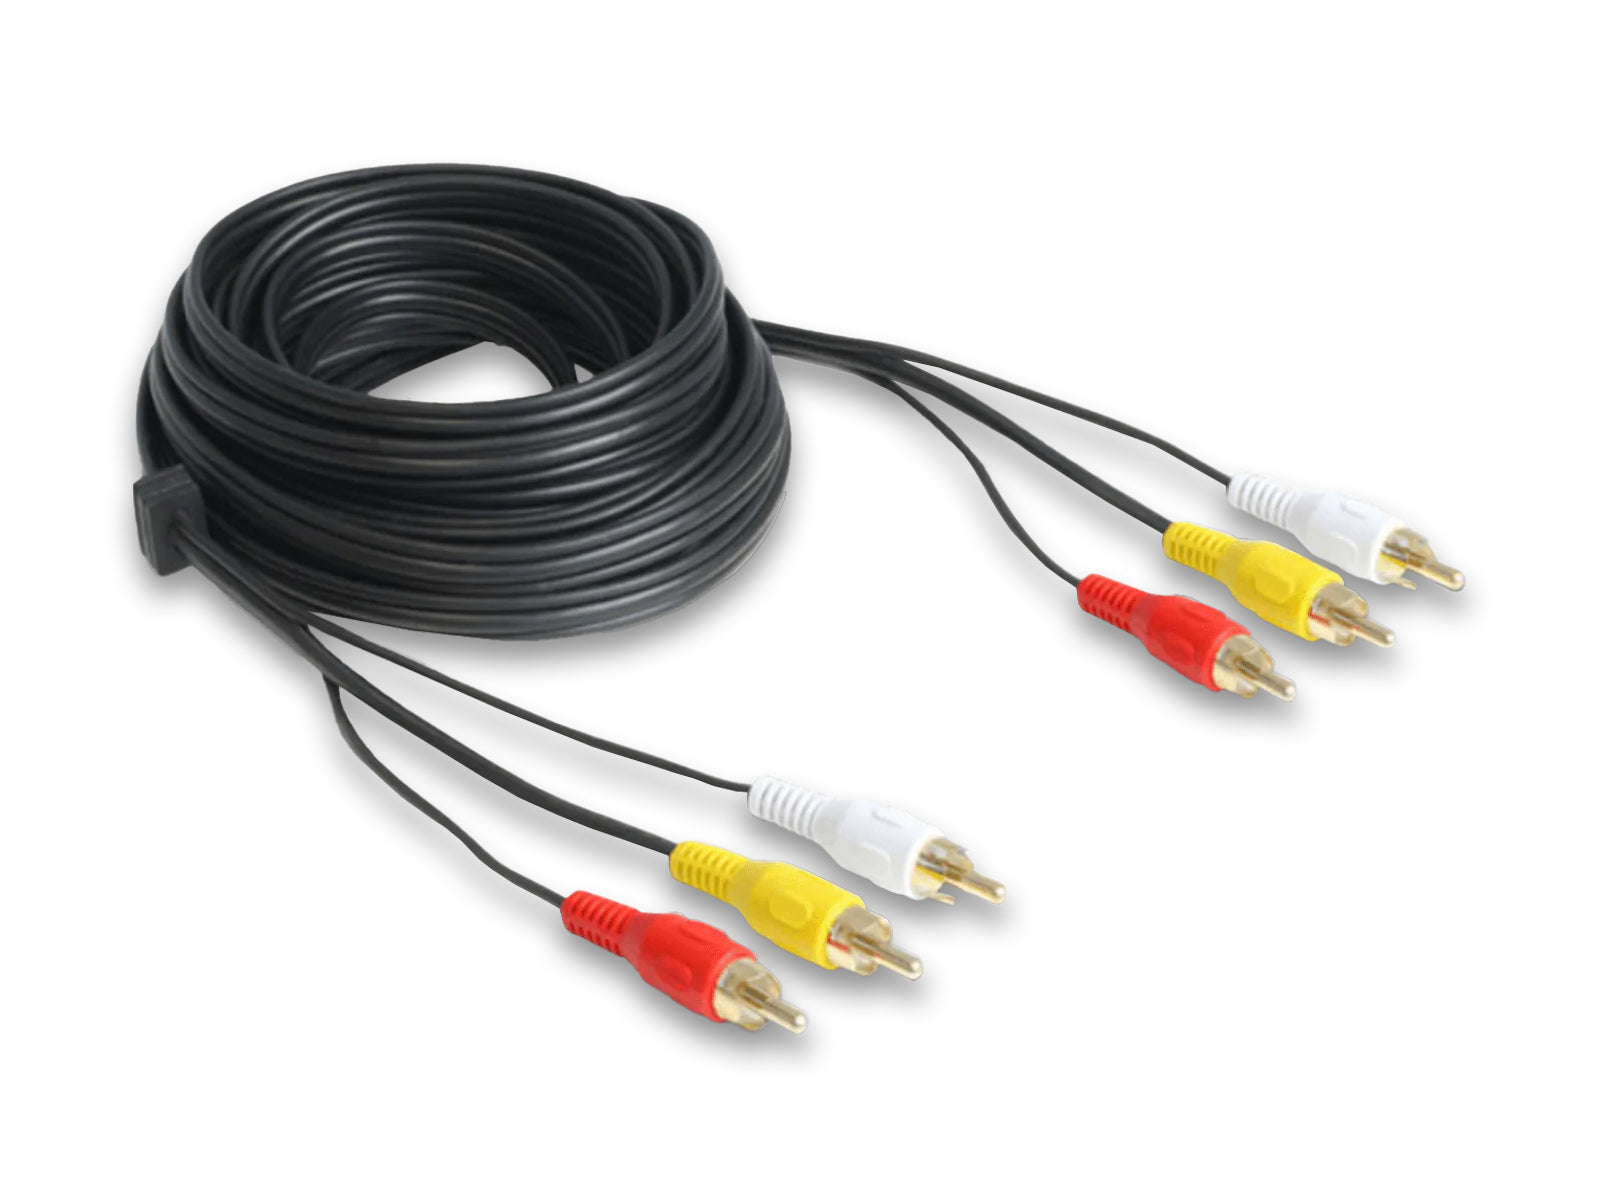 RCA Audio Cable White, Yellow & Red Full View